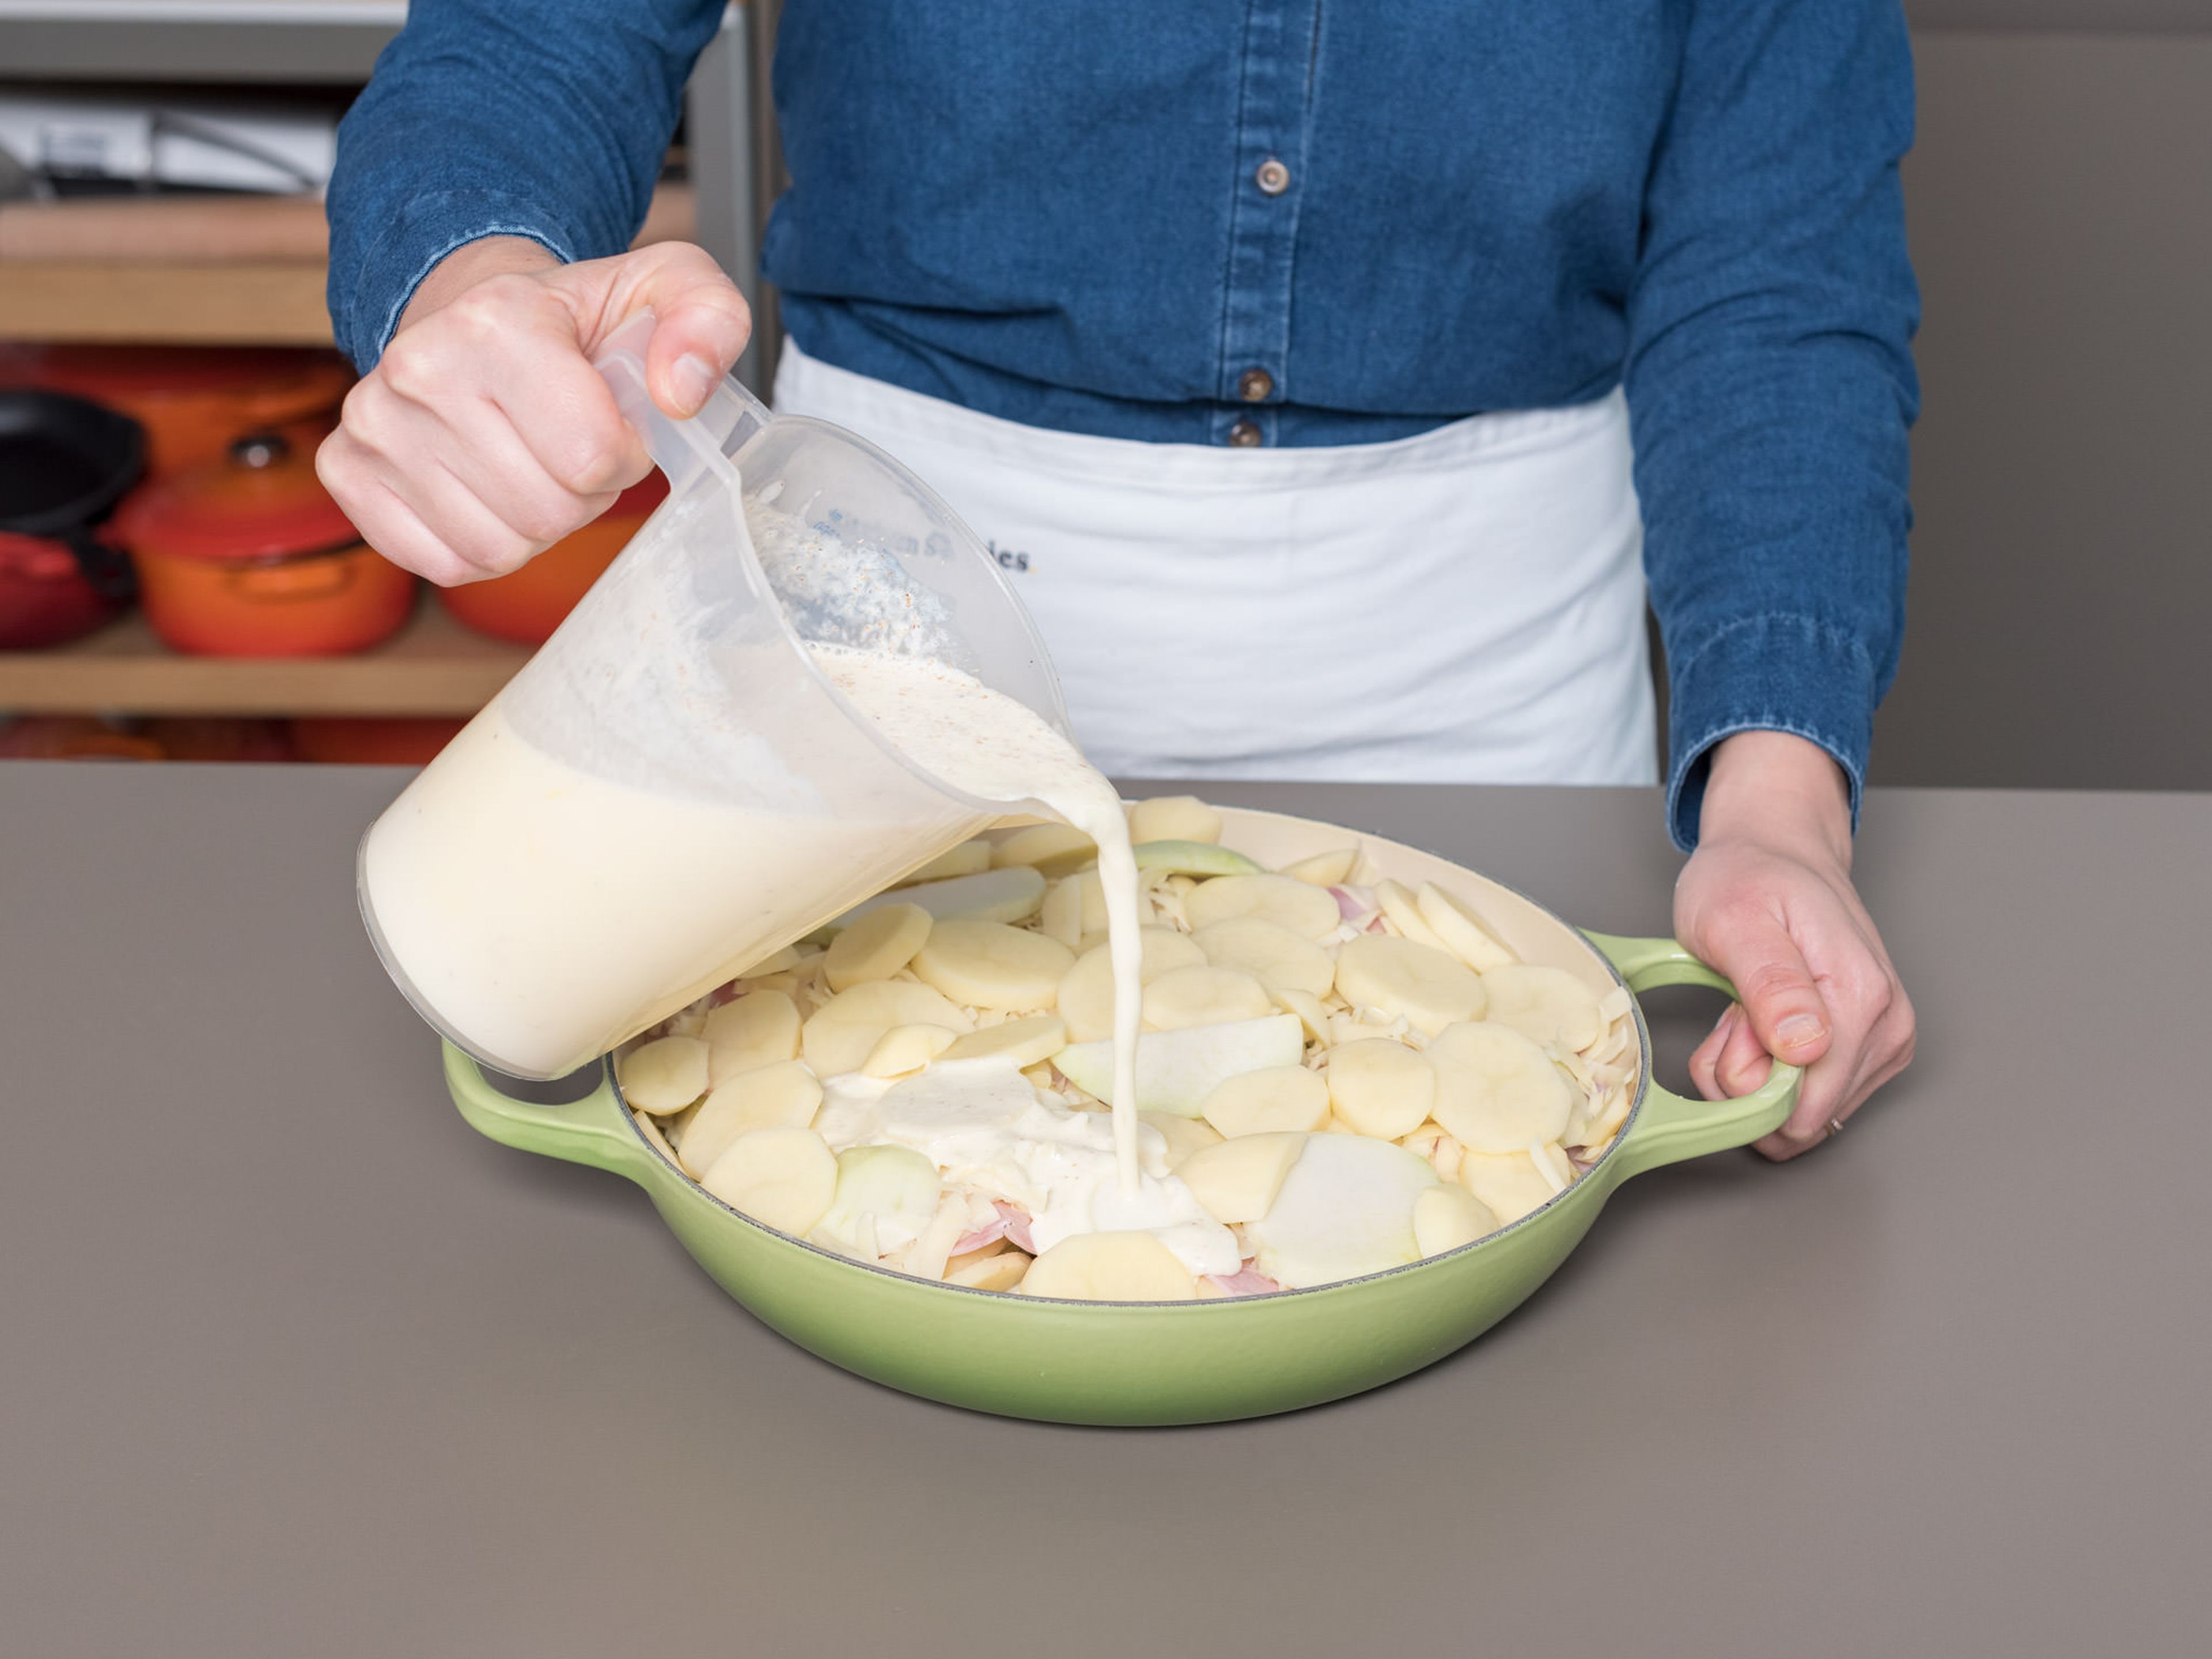 Pour the cream mixture over everything, and top off the casserole with the remaining cheese and oats.